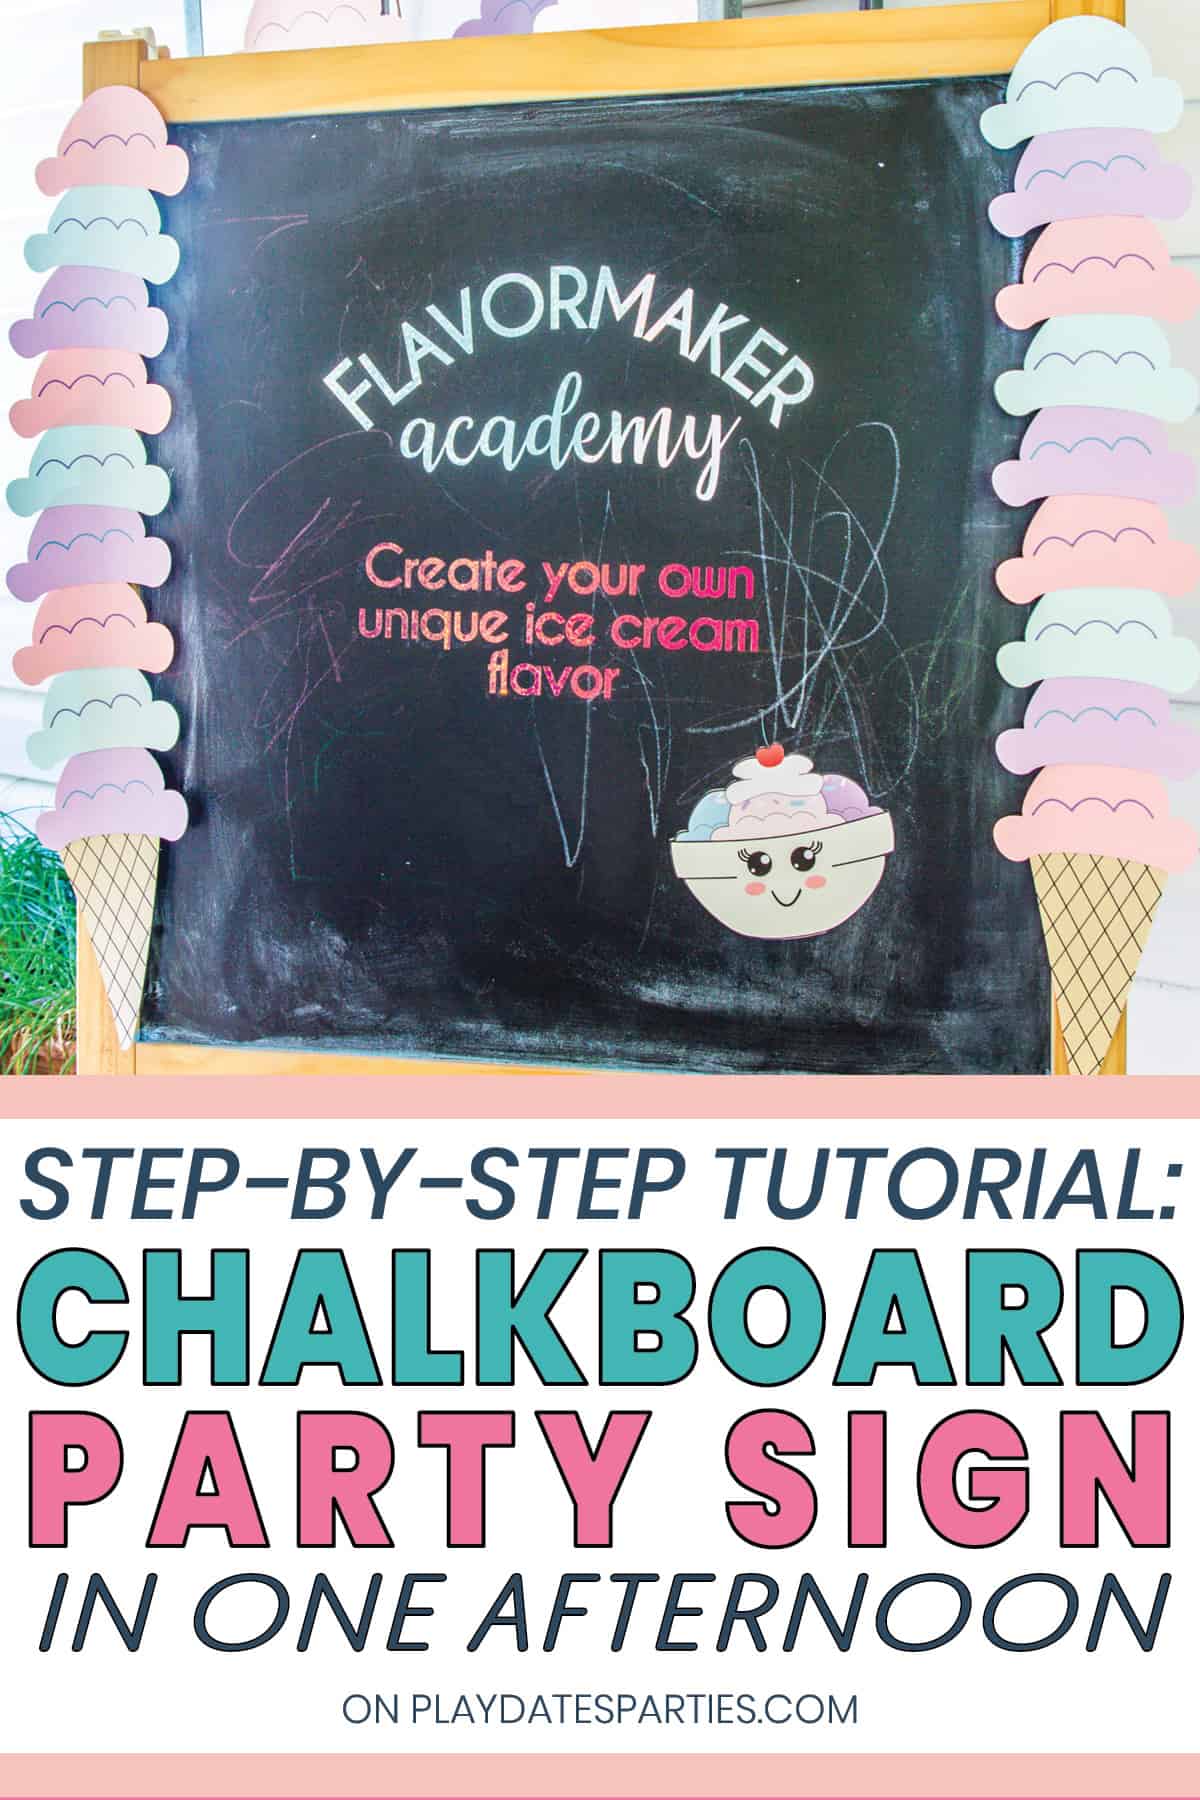 Chalkboard Party Sign Ice Cream Flavormaker Academy 6 